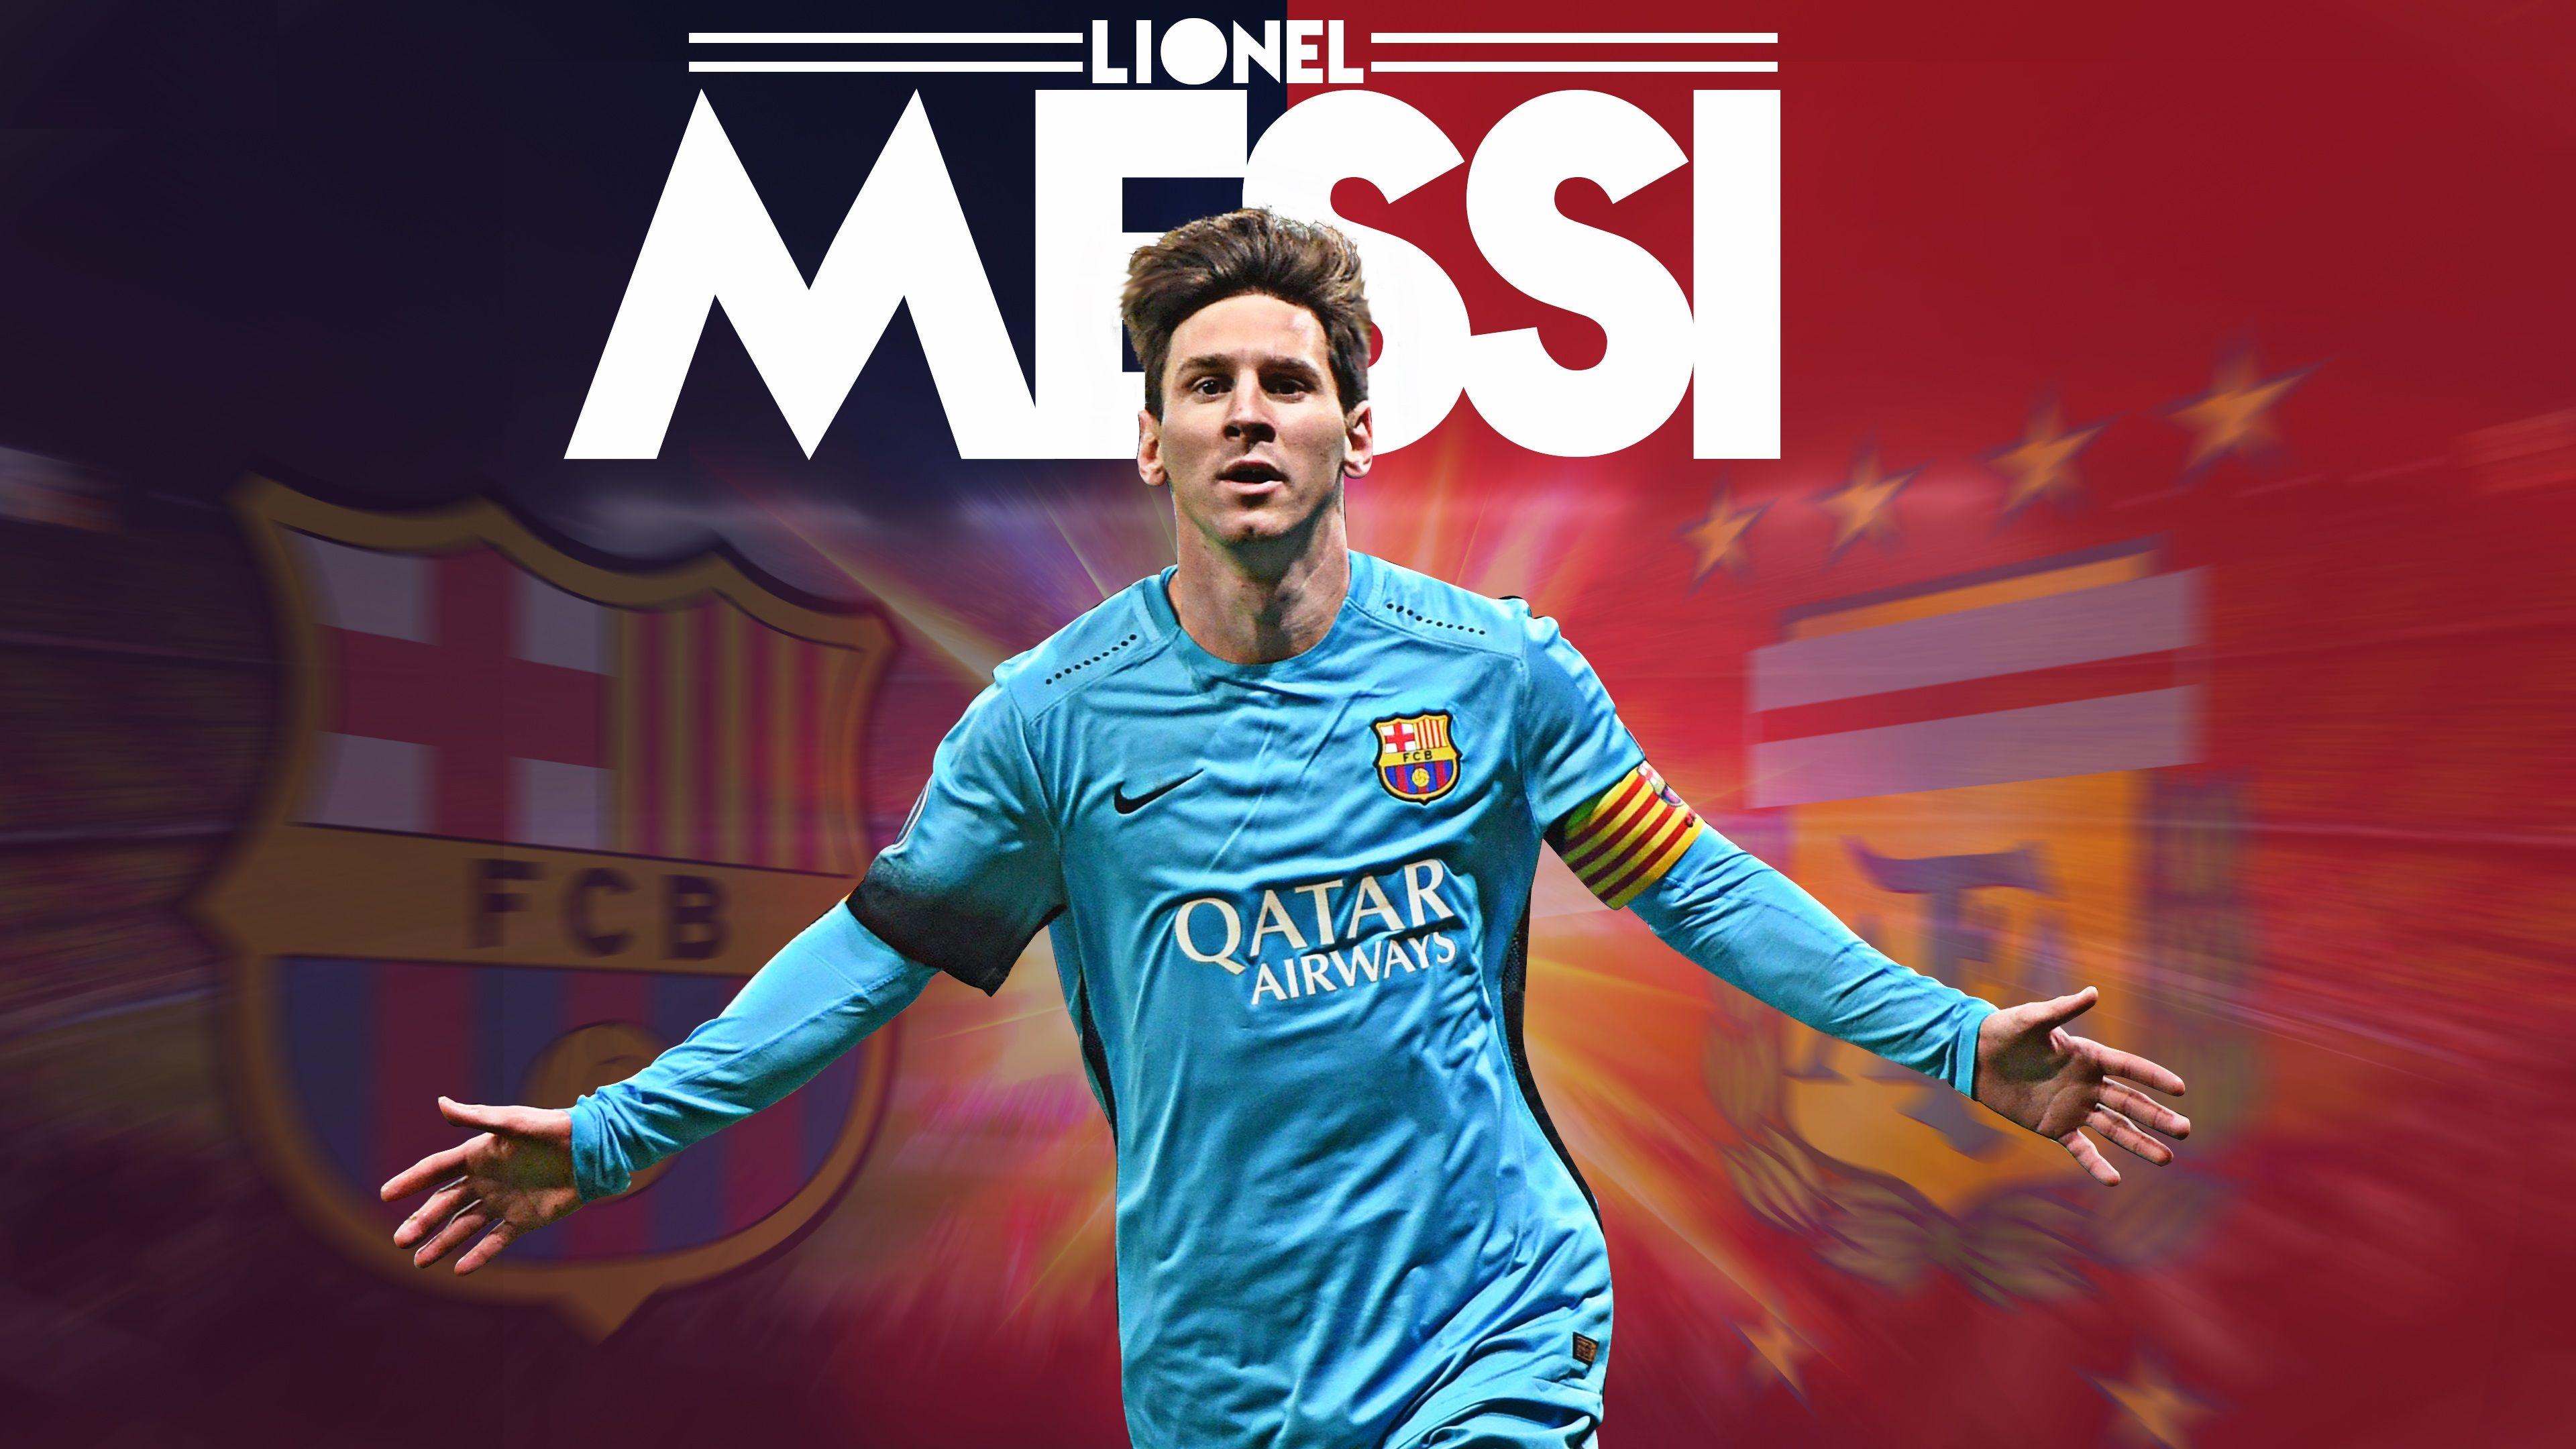 Lionel Messi Top Wallpaper 2018to5animations.com